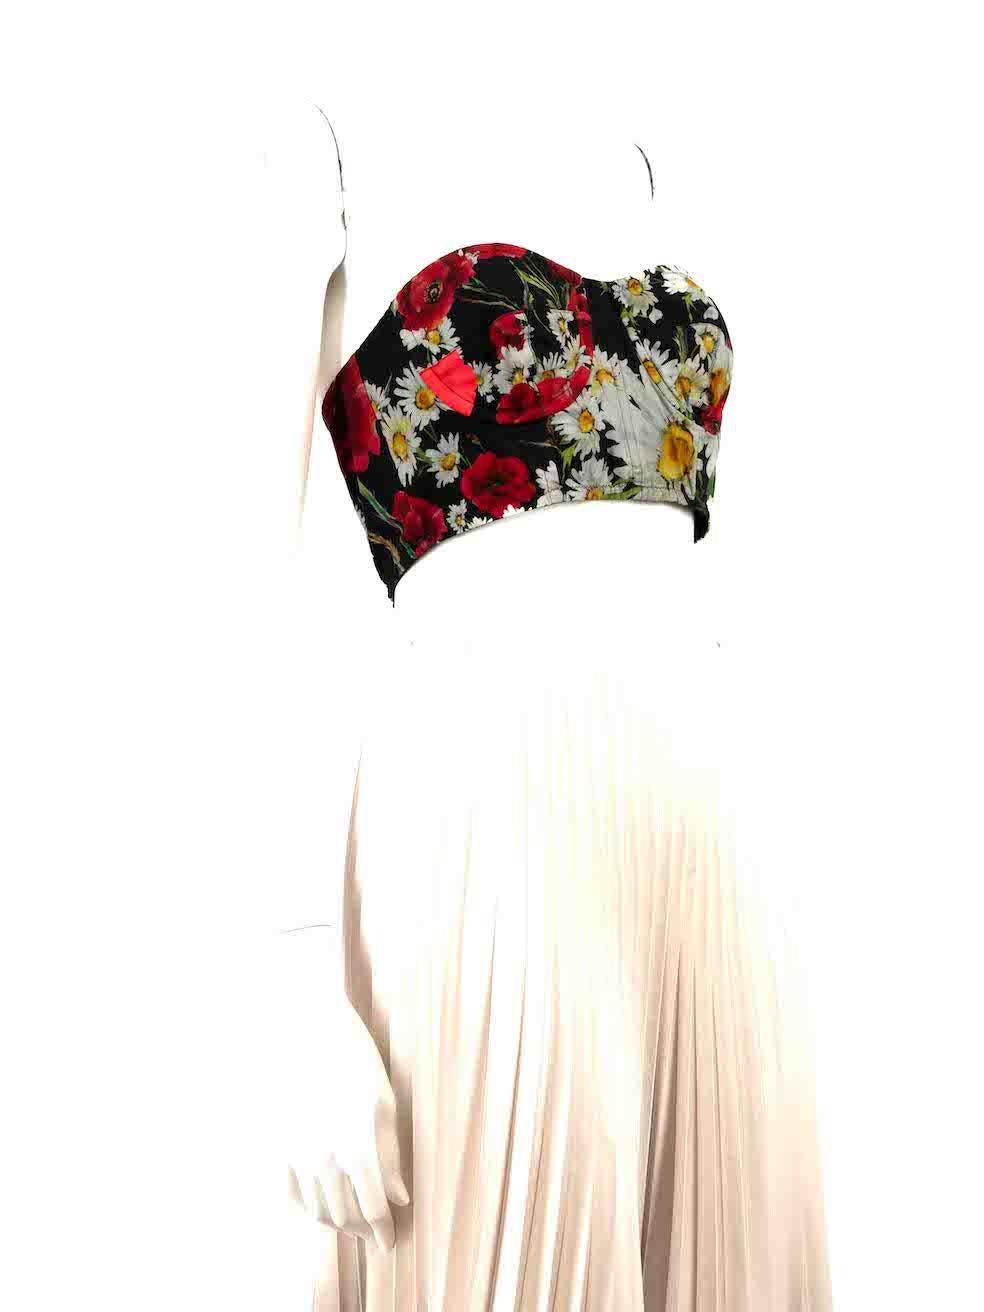 CONDITION is Very good. Hardly any visible wear to crop top is evident on this used Dolce & Gabbana designer resale item.
 
 Details
 Multicolour- black, red and white
 Cotton
 Bustier top
 Floral pattern
 Cropped fit
 Strapless
 Back zip fastening
